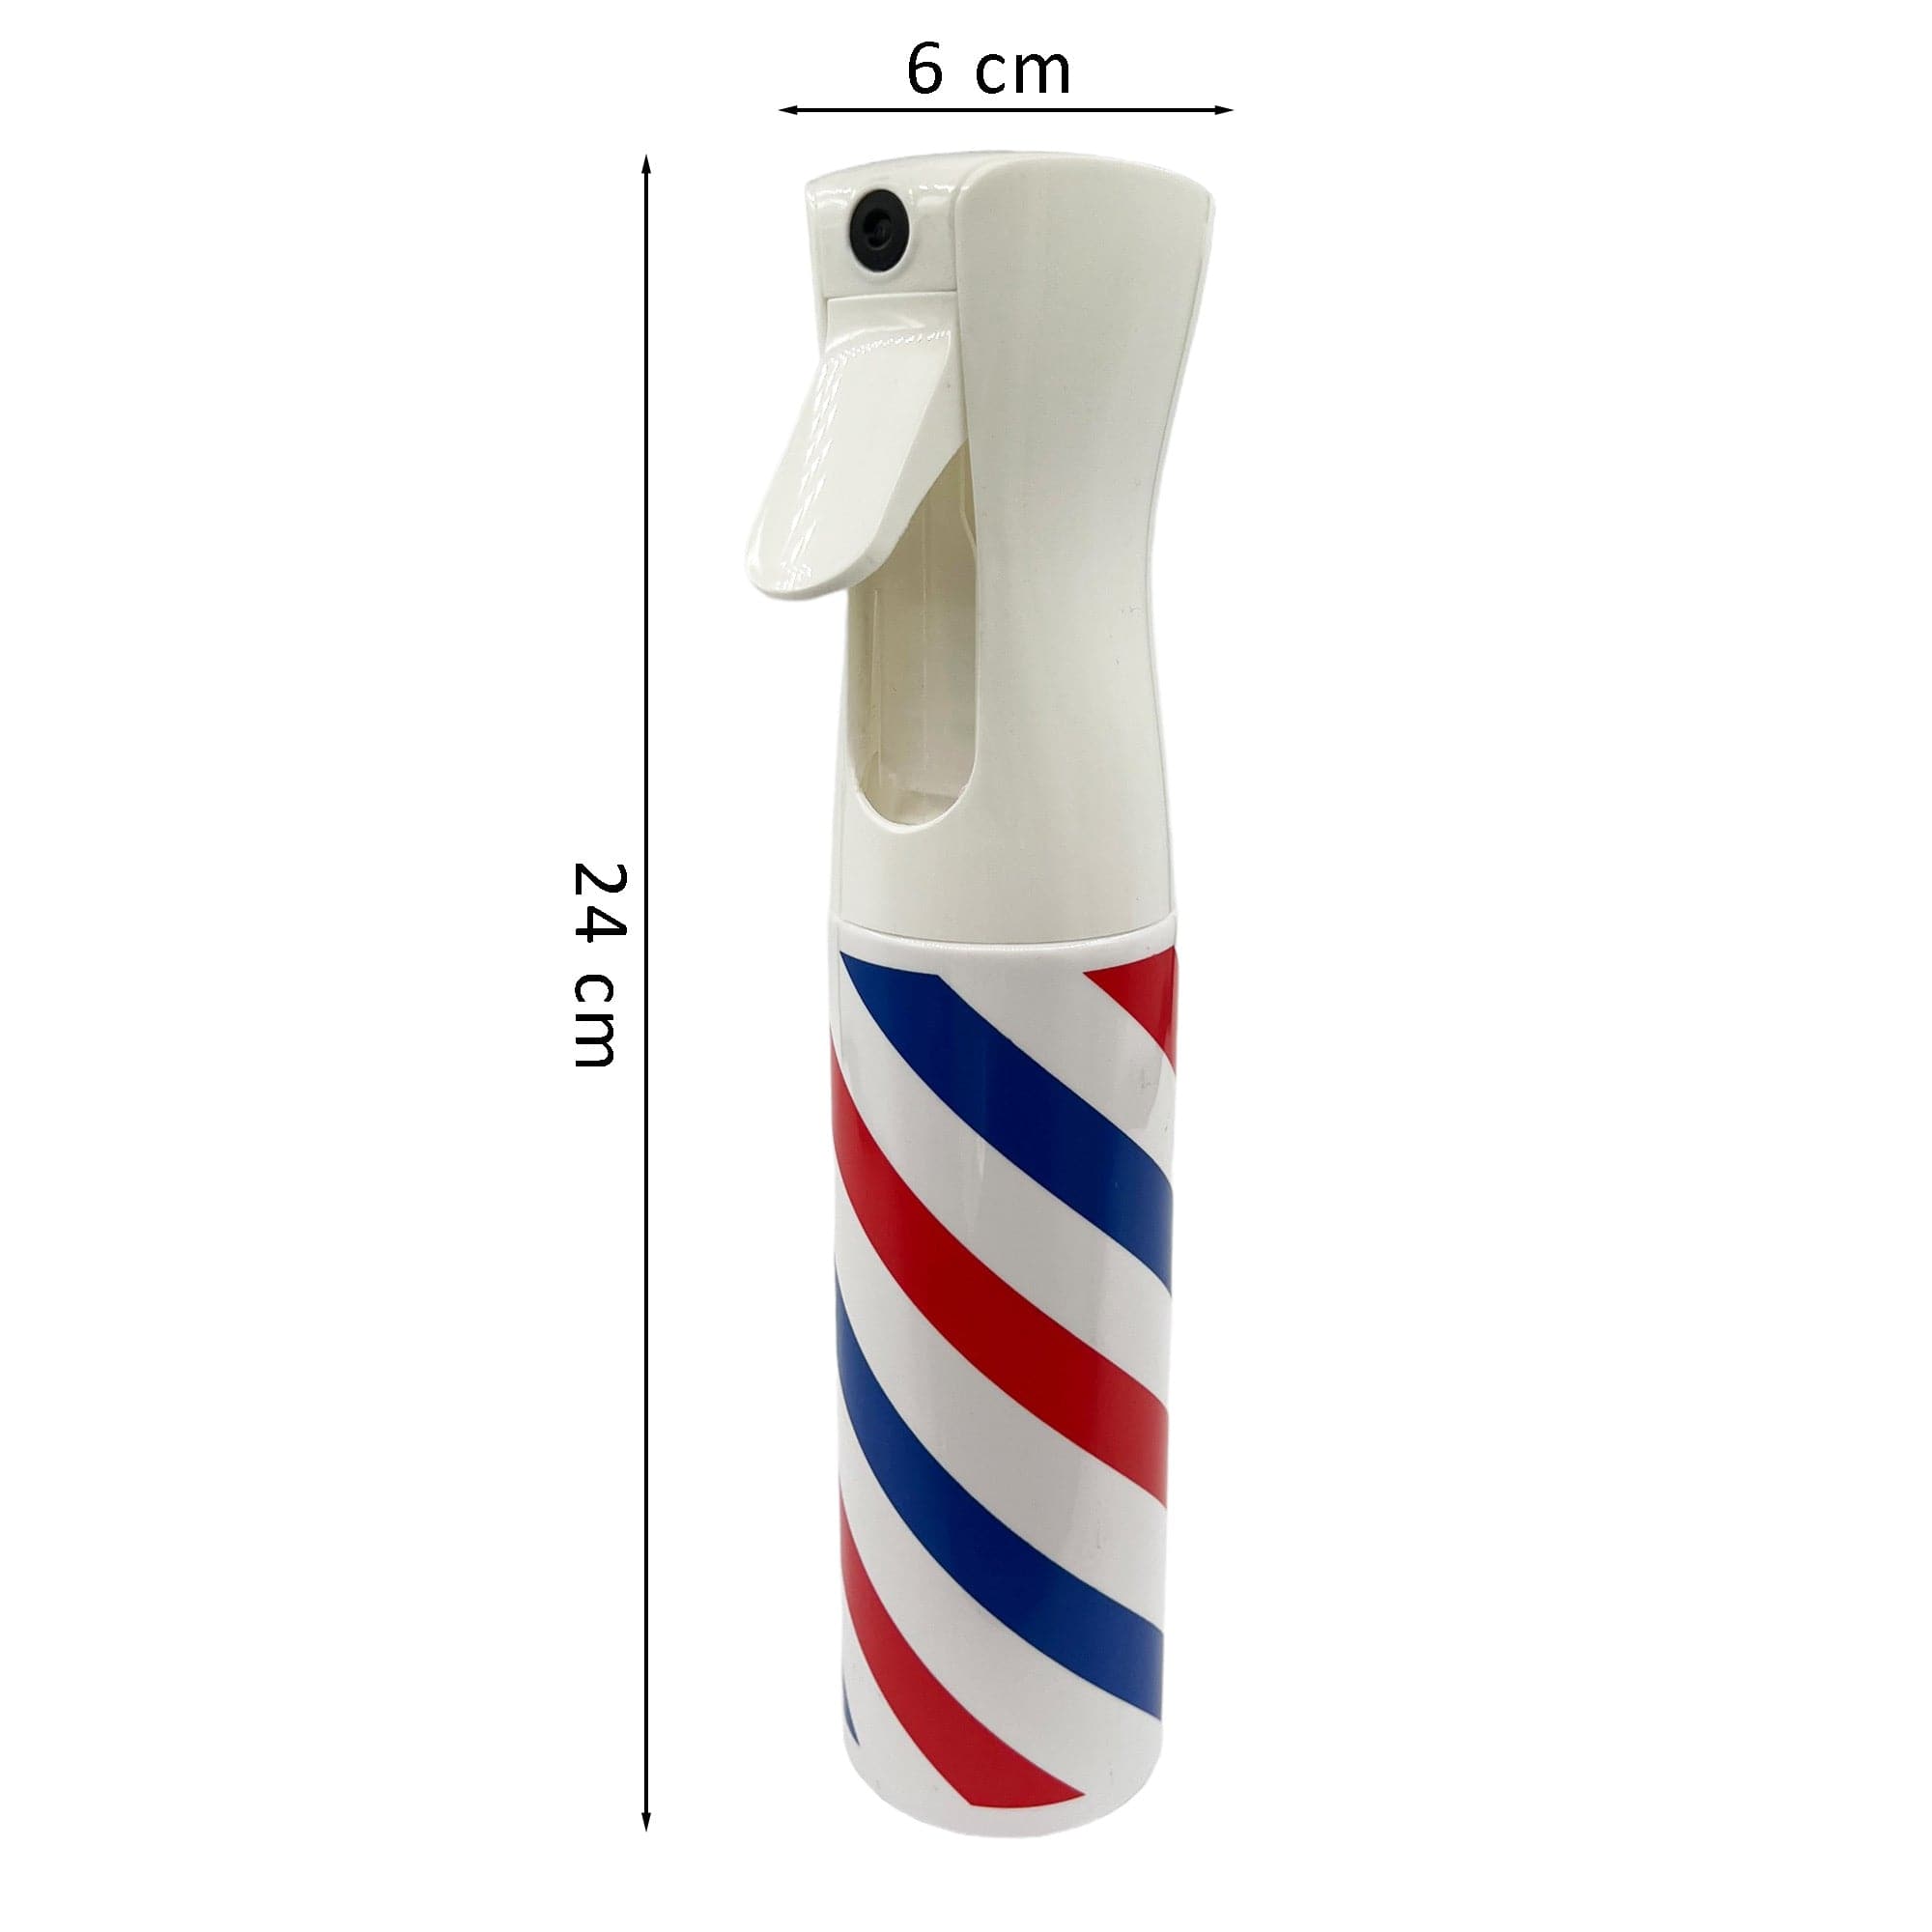 Eson - Water Spray Bottle 300ml Empty Refillable Continuous Water (Red White & Blue) - Eson Direct